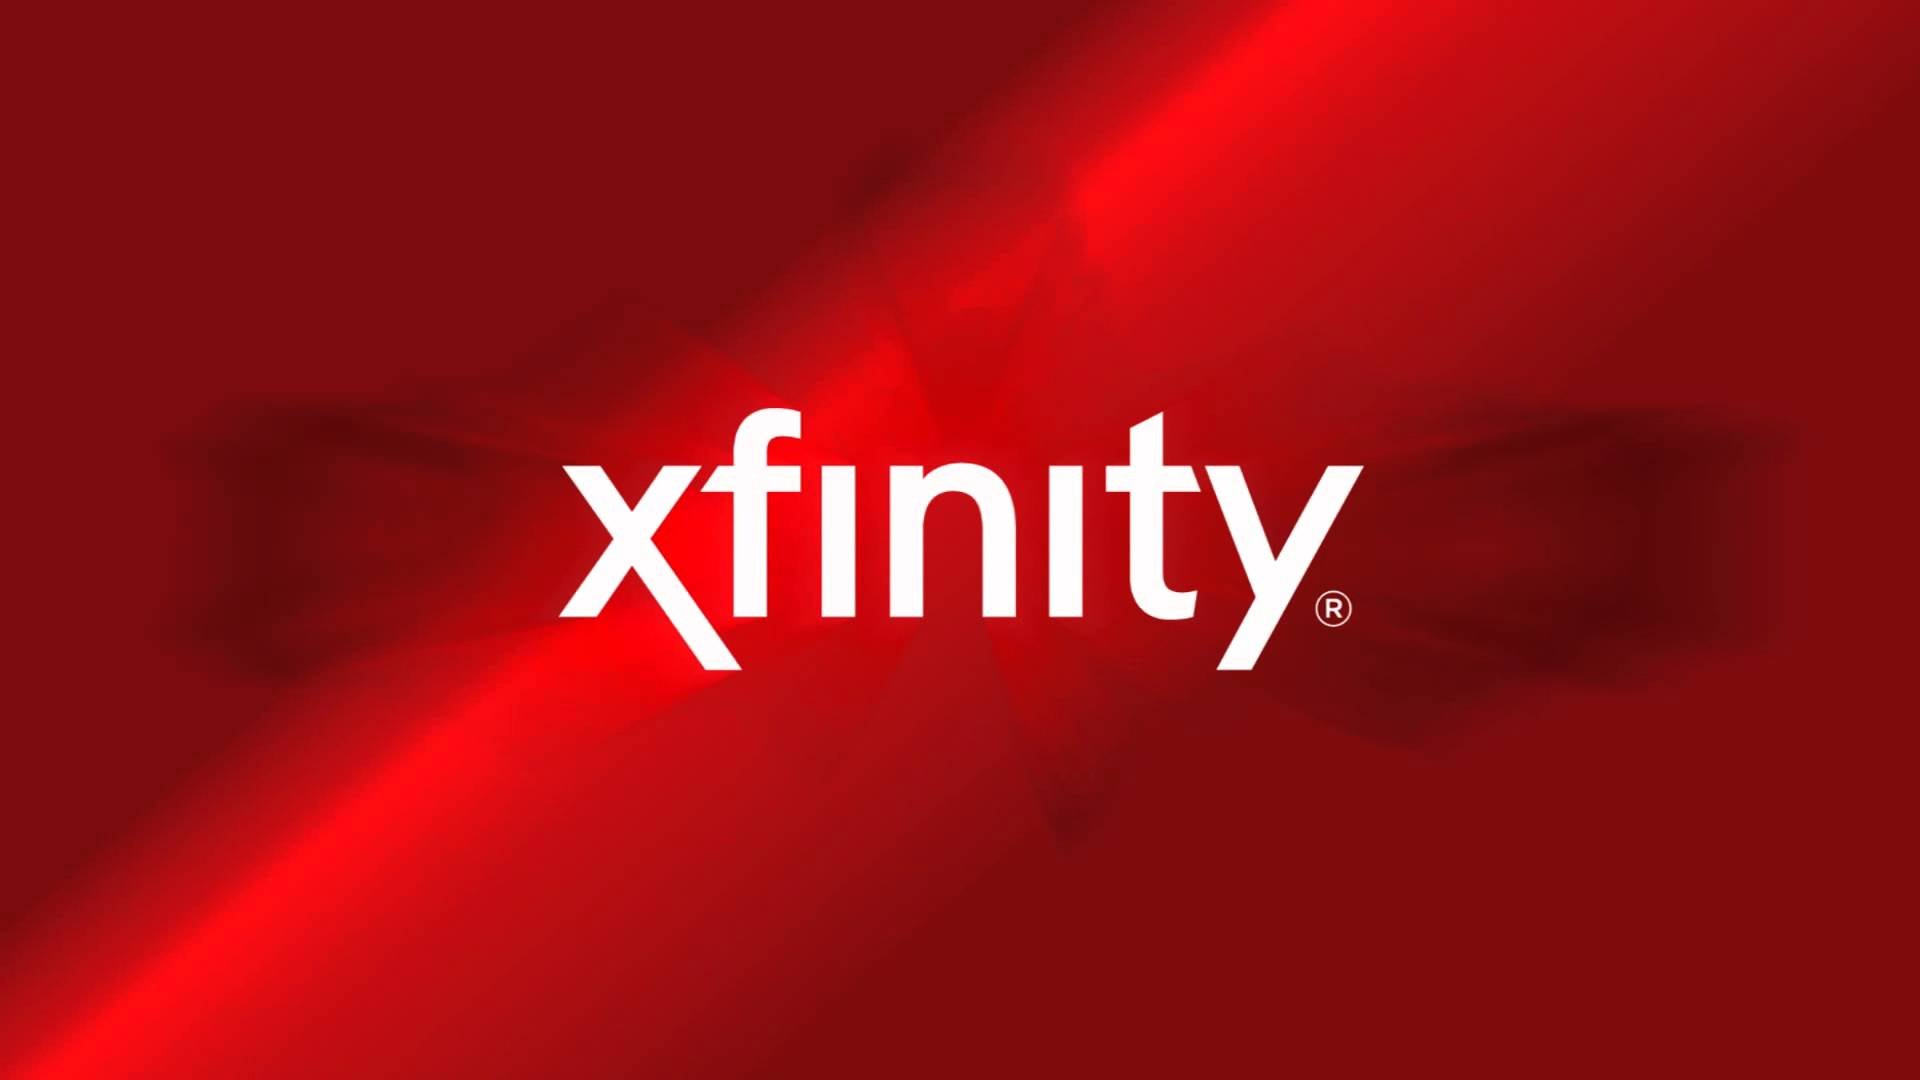 Top 5 Xfinity Comcast Compatible Modem under $50 – 2020 Updated List